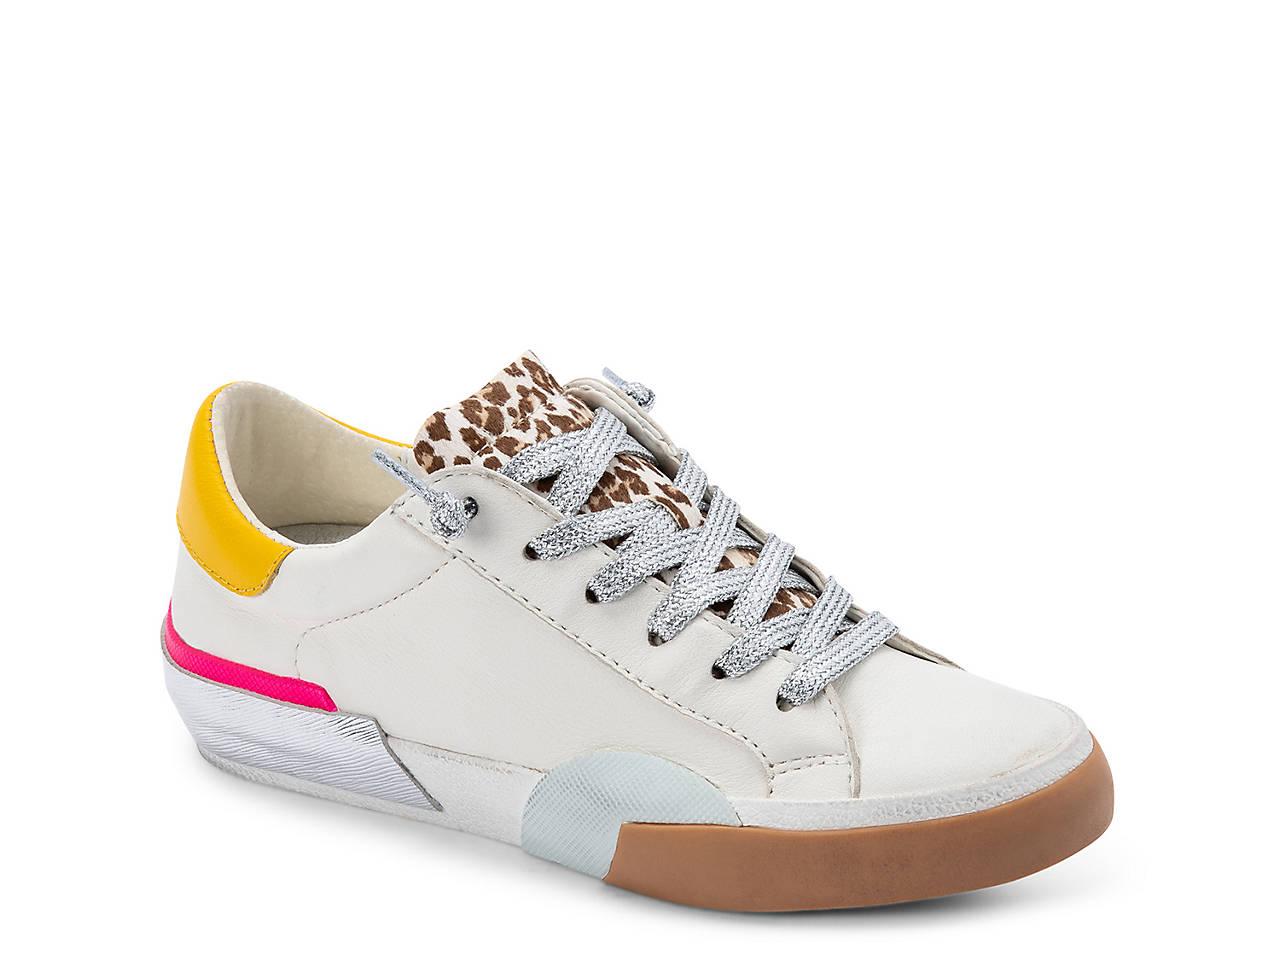 Dolce Vita Leather Zina Court Sneaker in White - Lyst